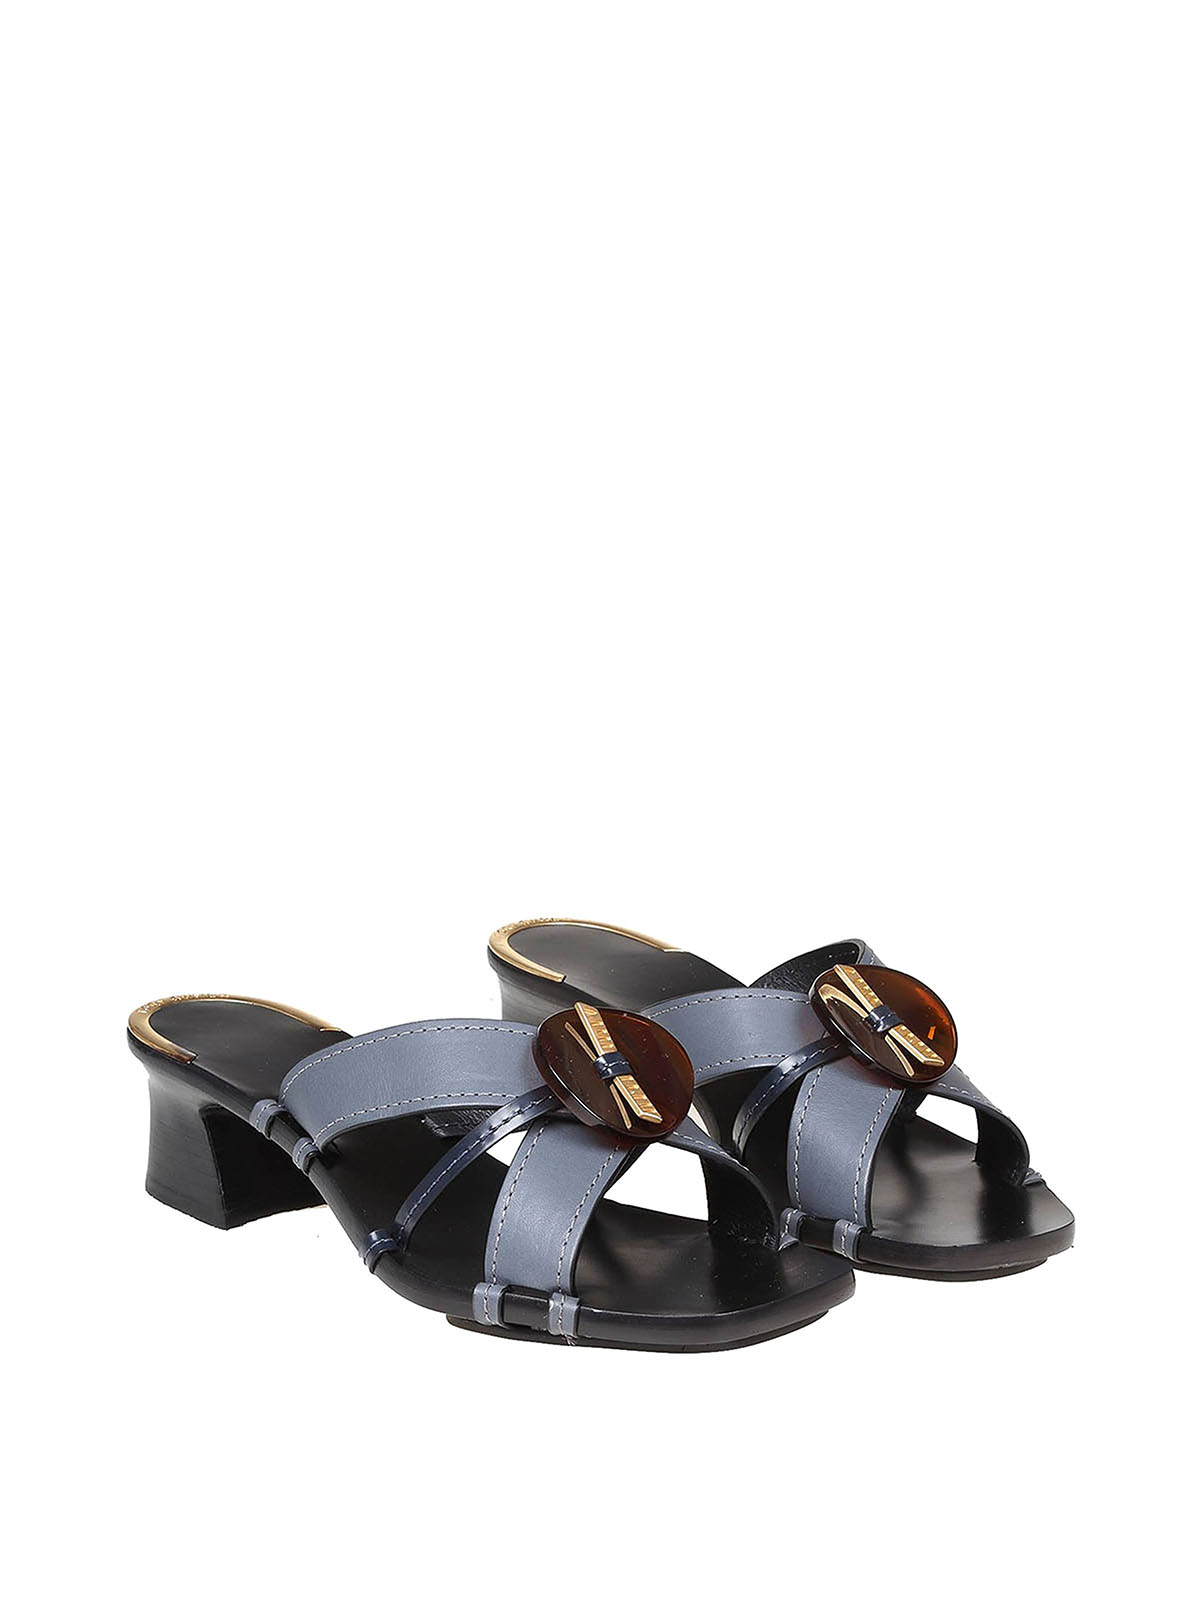 Mules shoes Tory Burch - Leather mules with resin detail - 136958